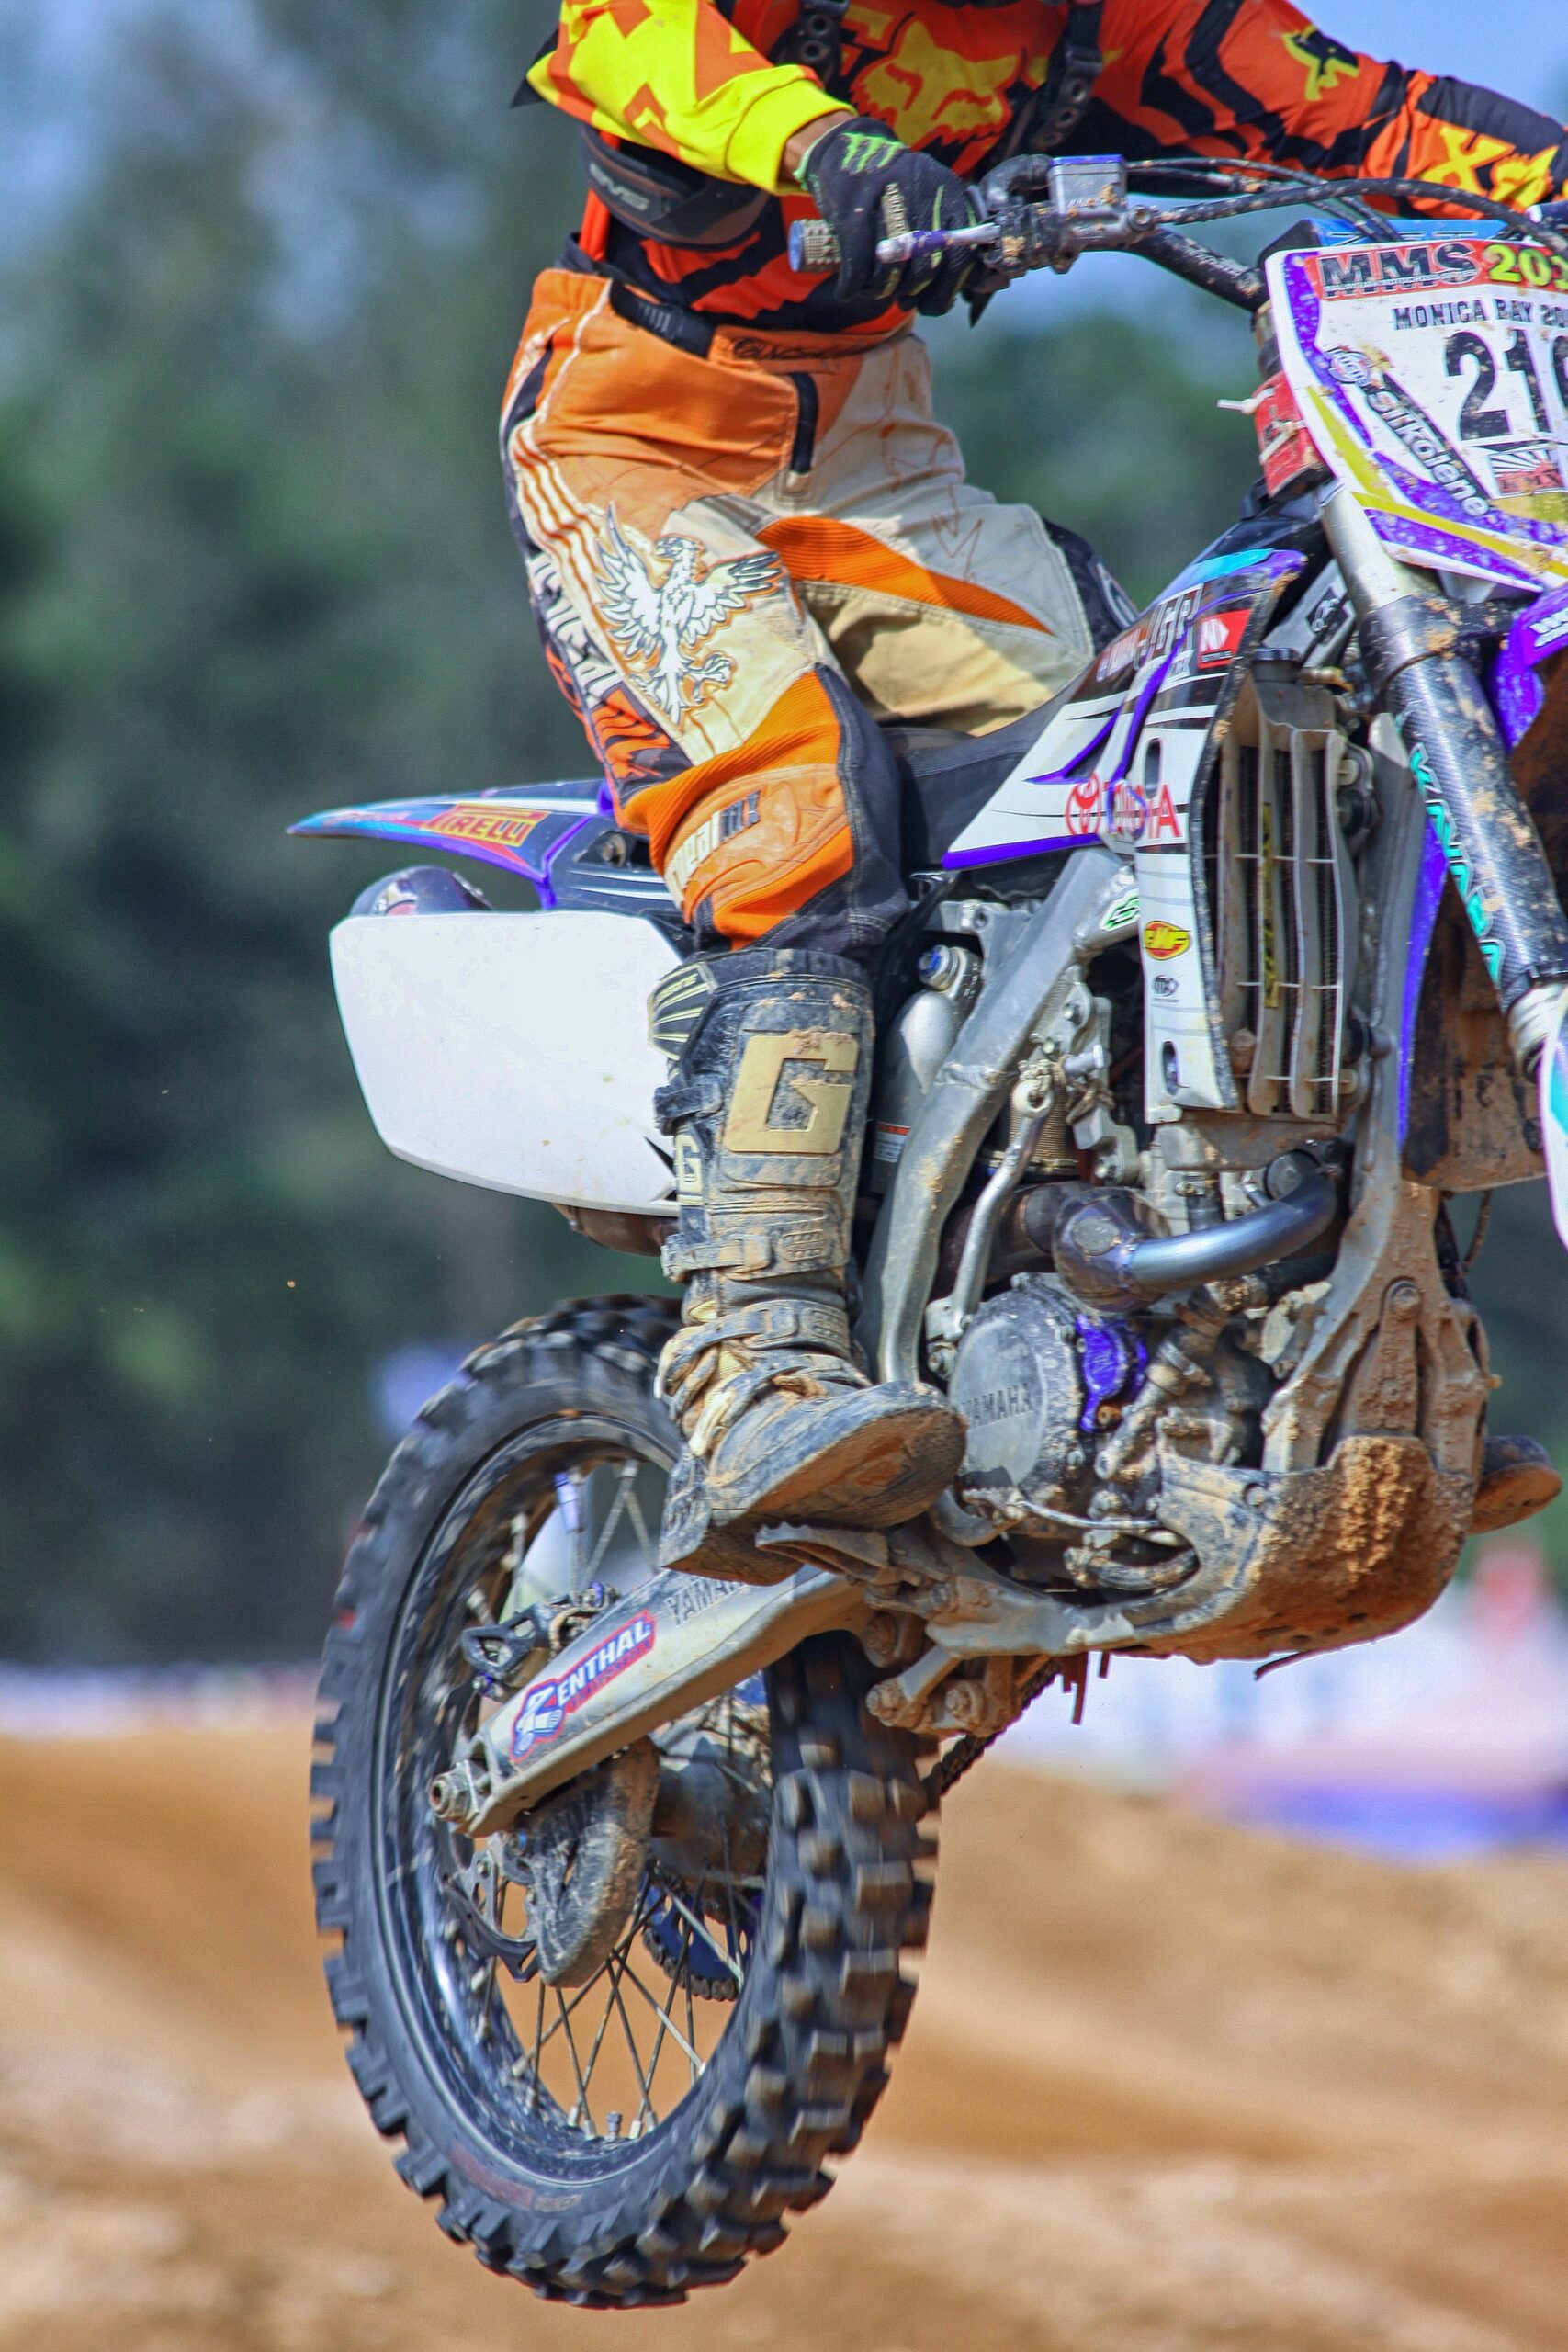 Top 8 Off-Road Riding Tips: Sharpen your dirt bike riding Skills